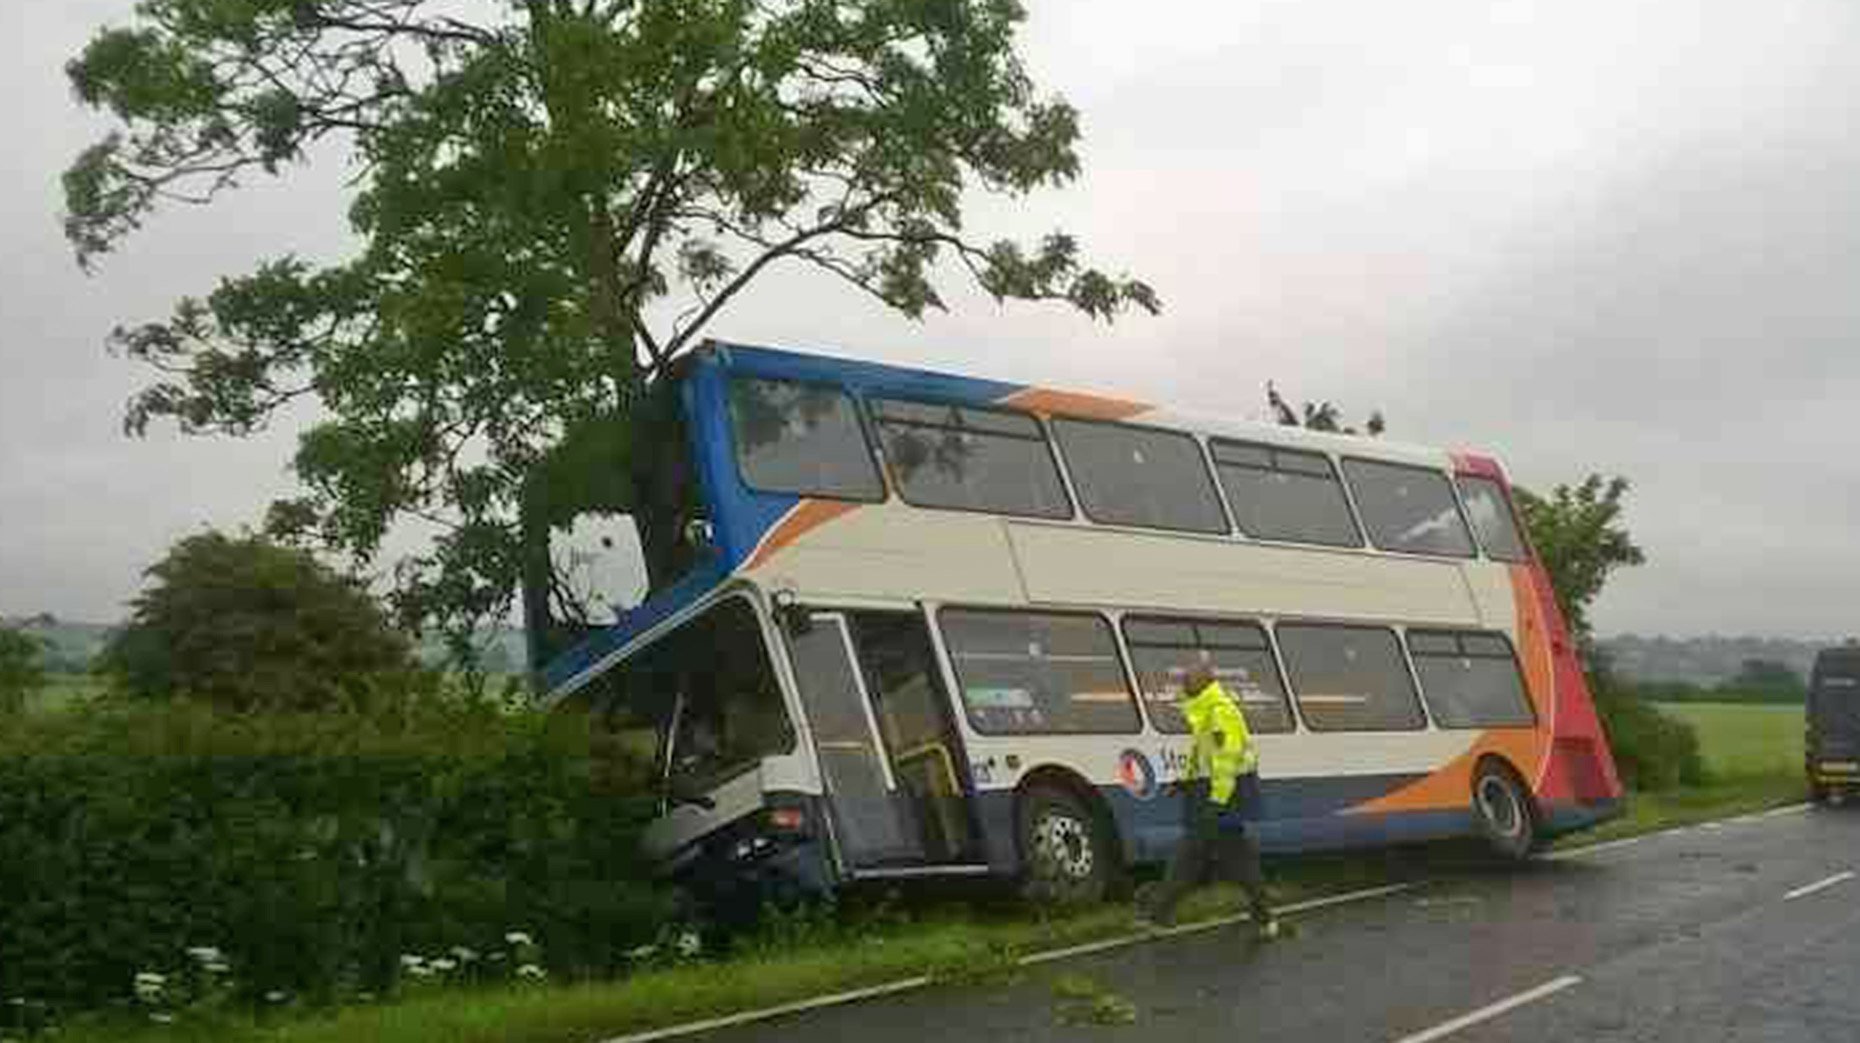 The bus veered off the road and into a tree, which was lodged into the front section. 